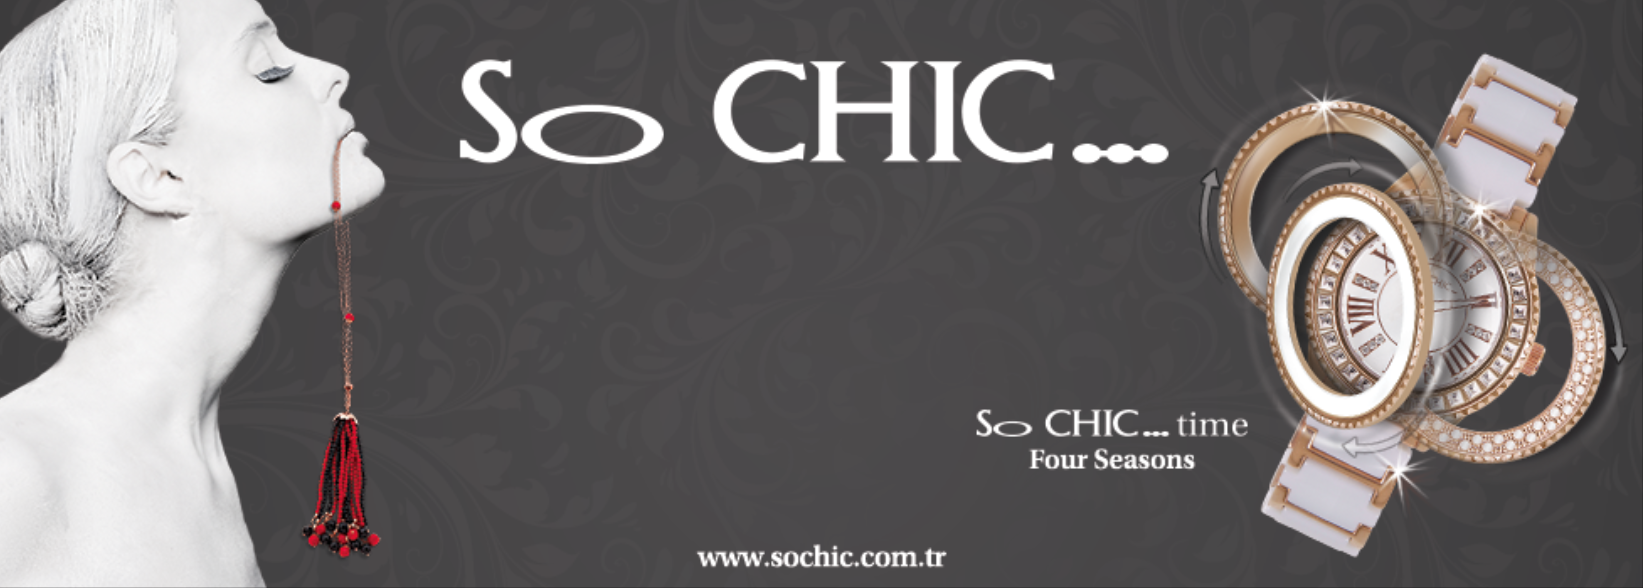 so_chic-2f7.png